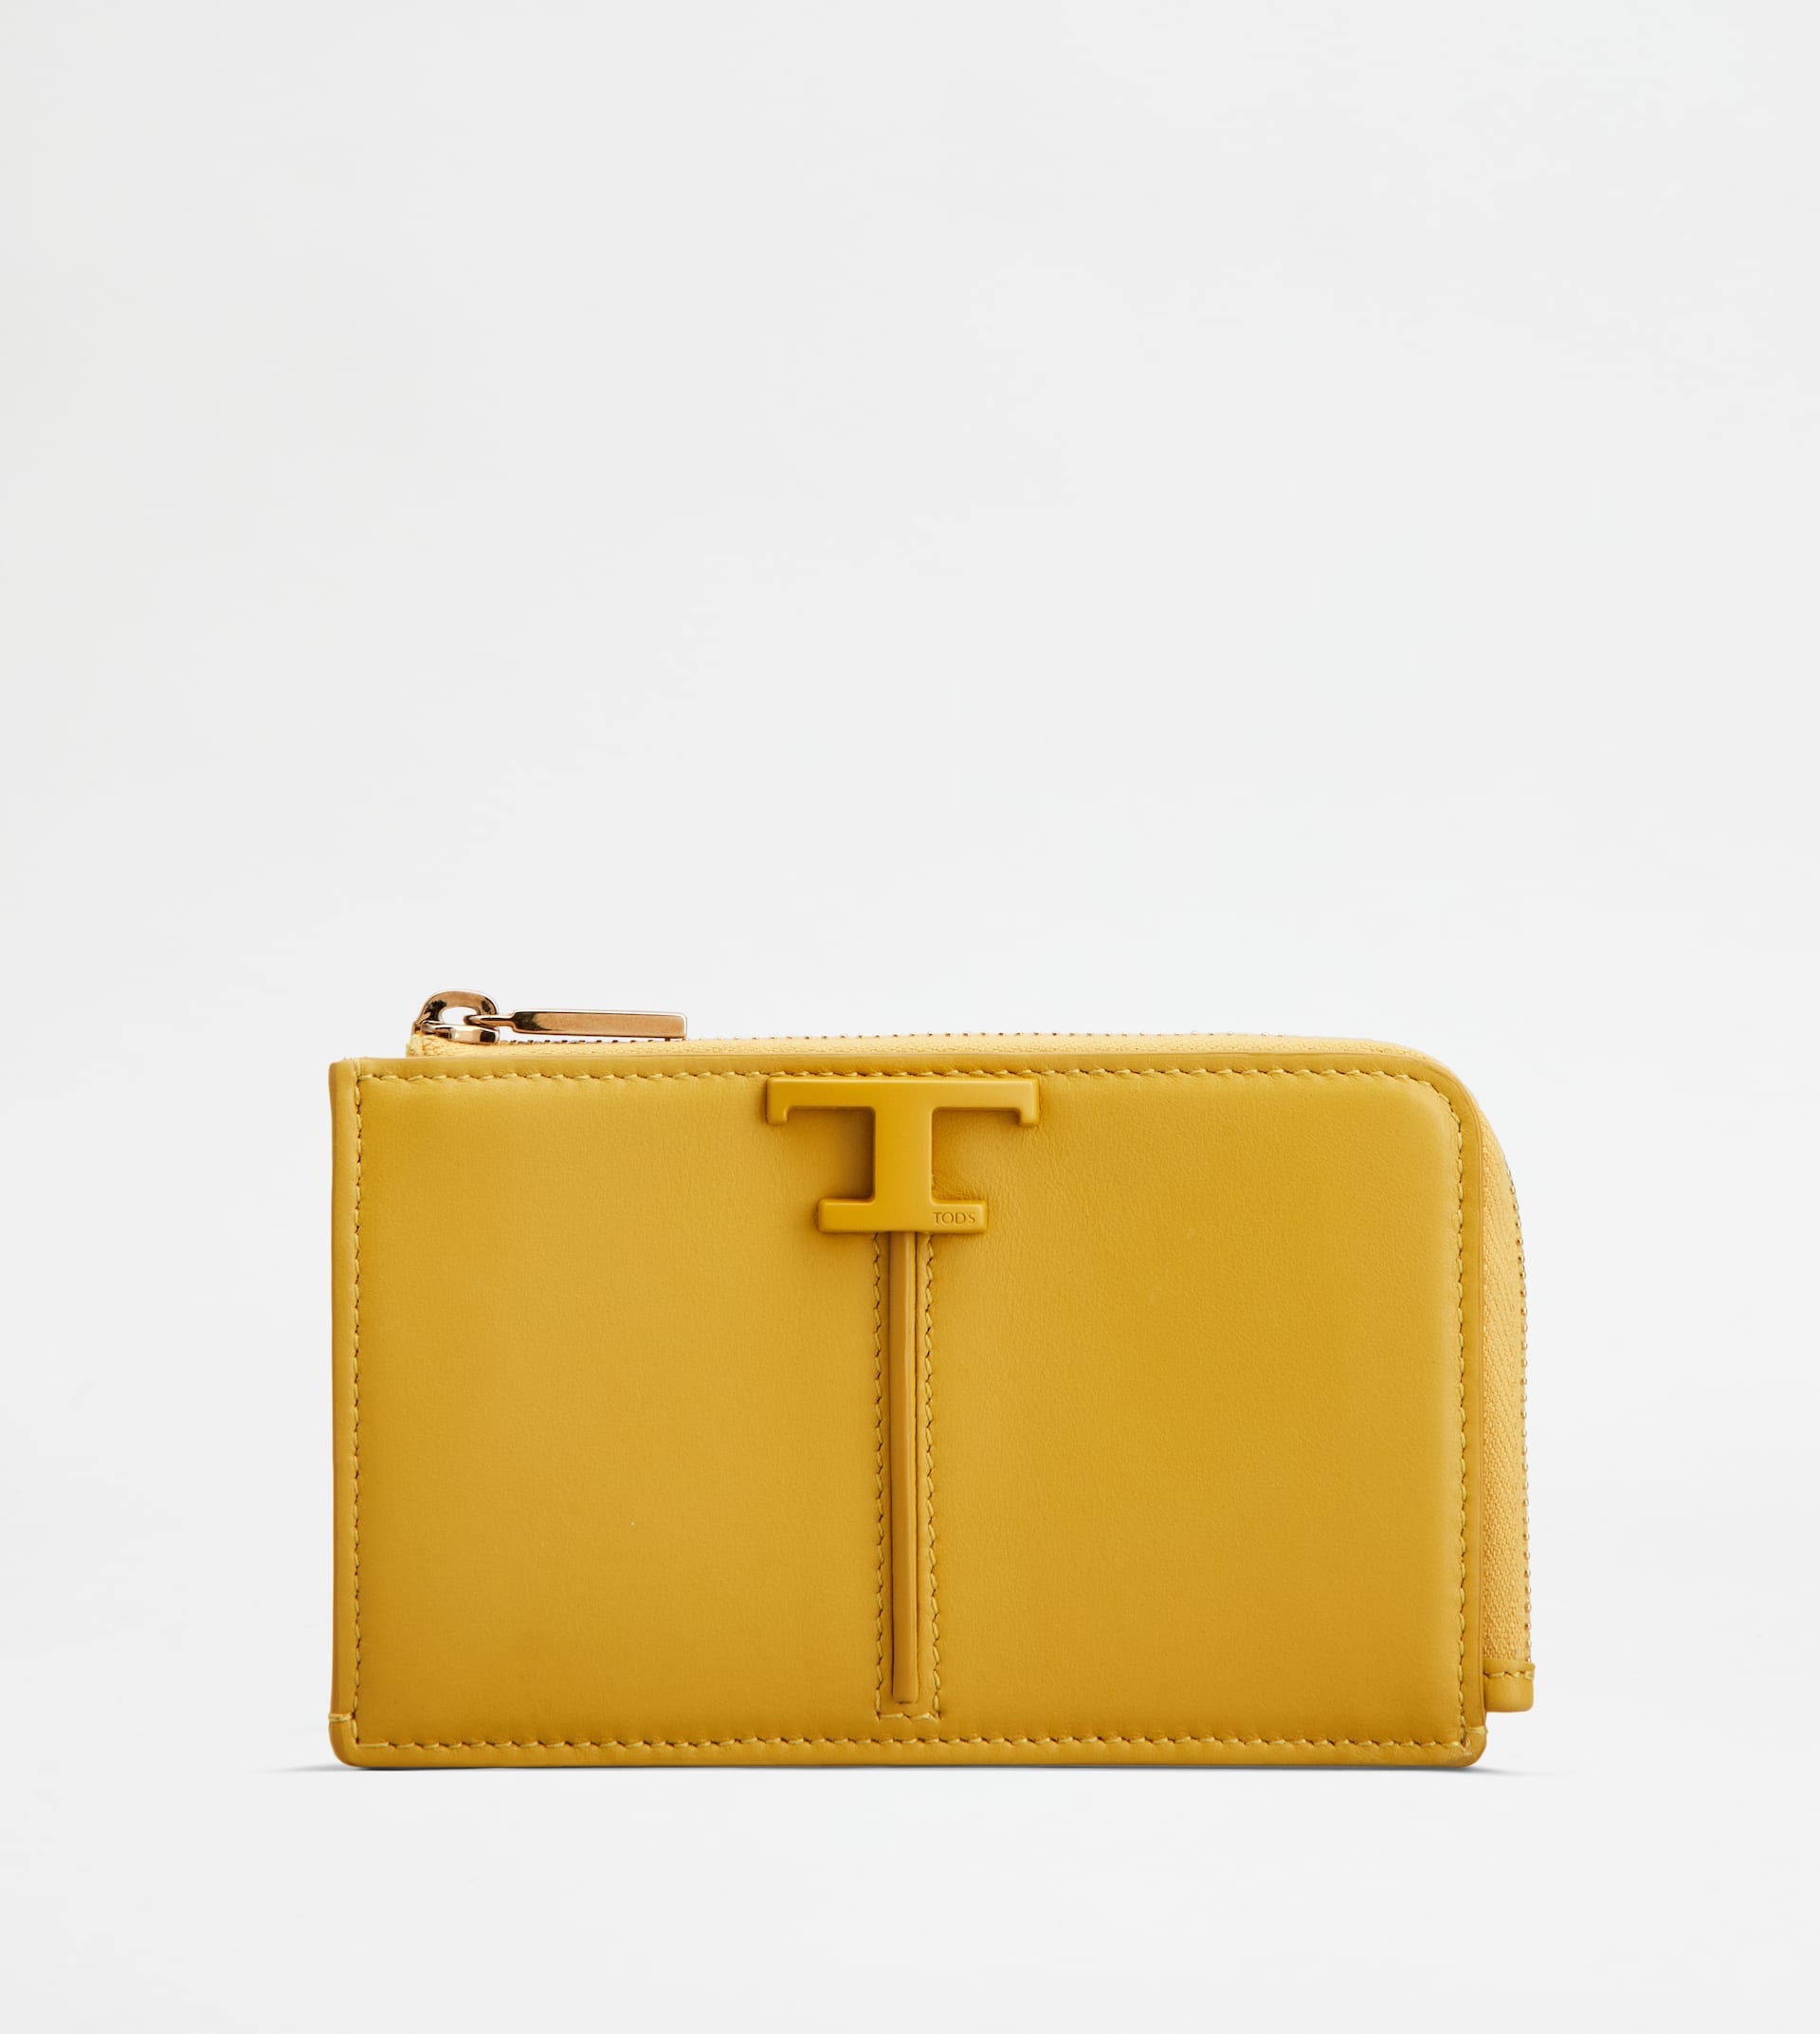 T TIMELESS KEY POUCH IN LEATHER - YELLOW - 1